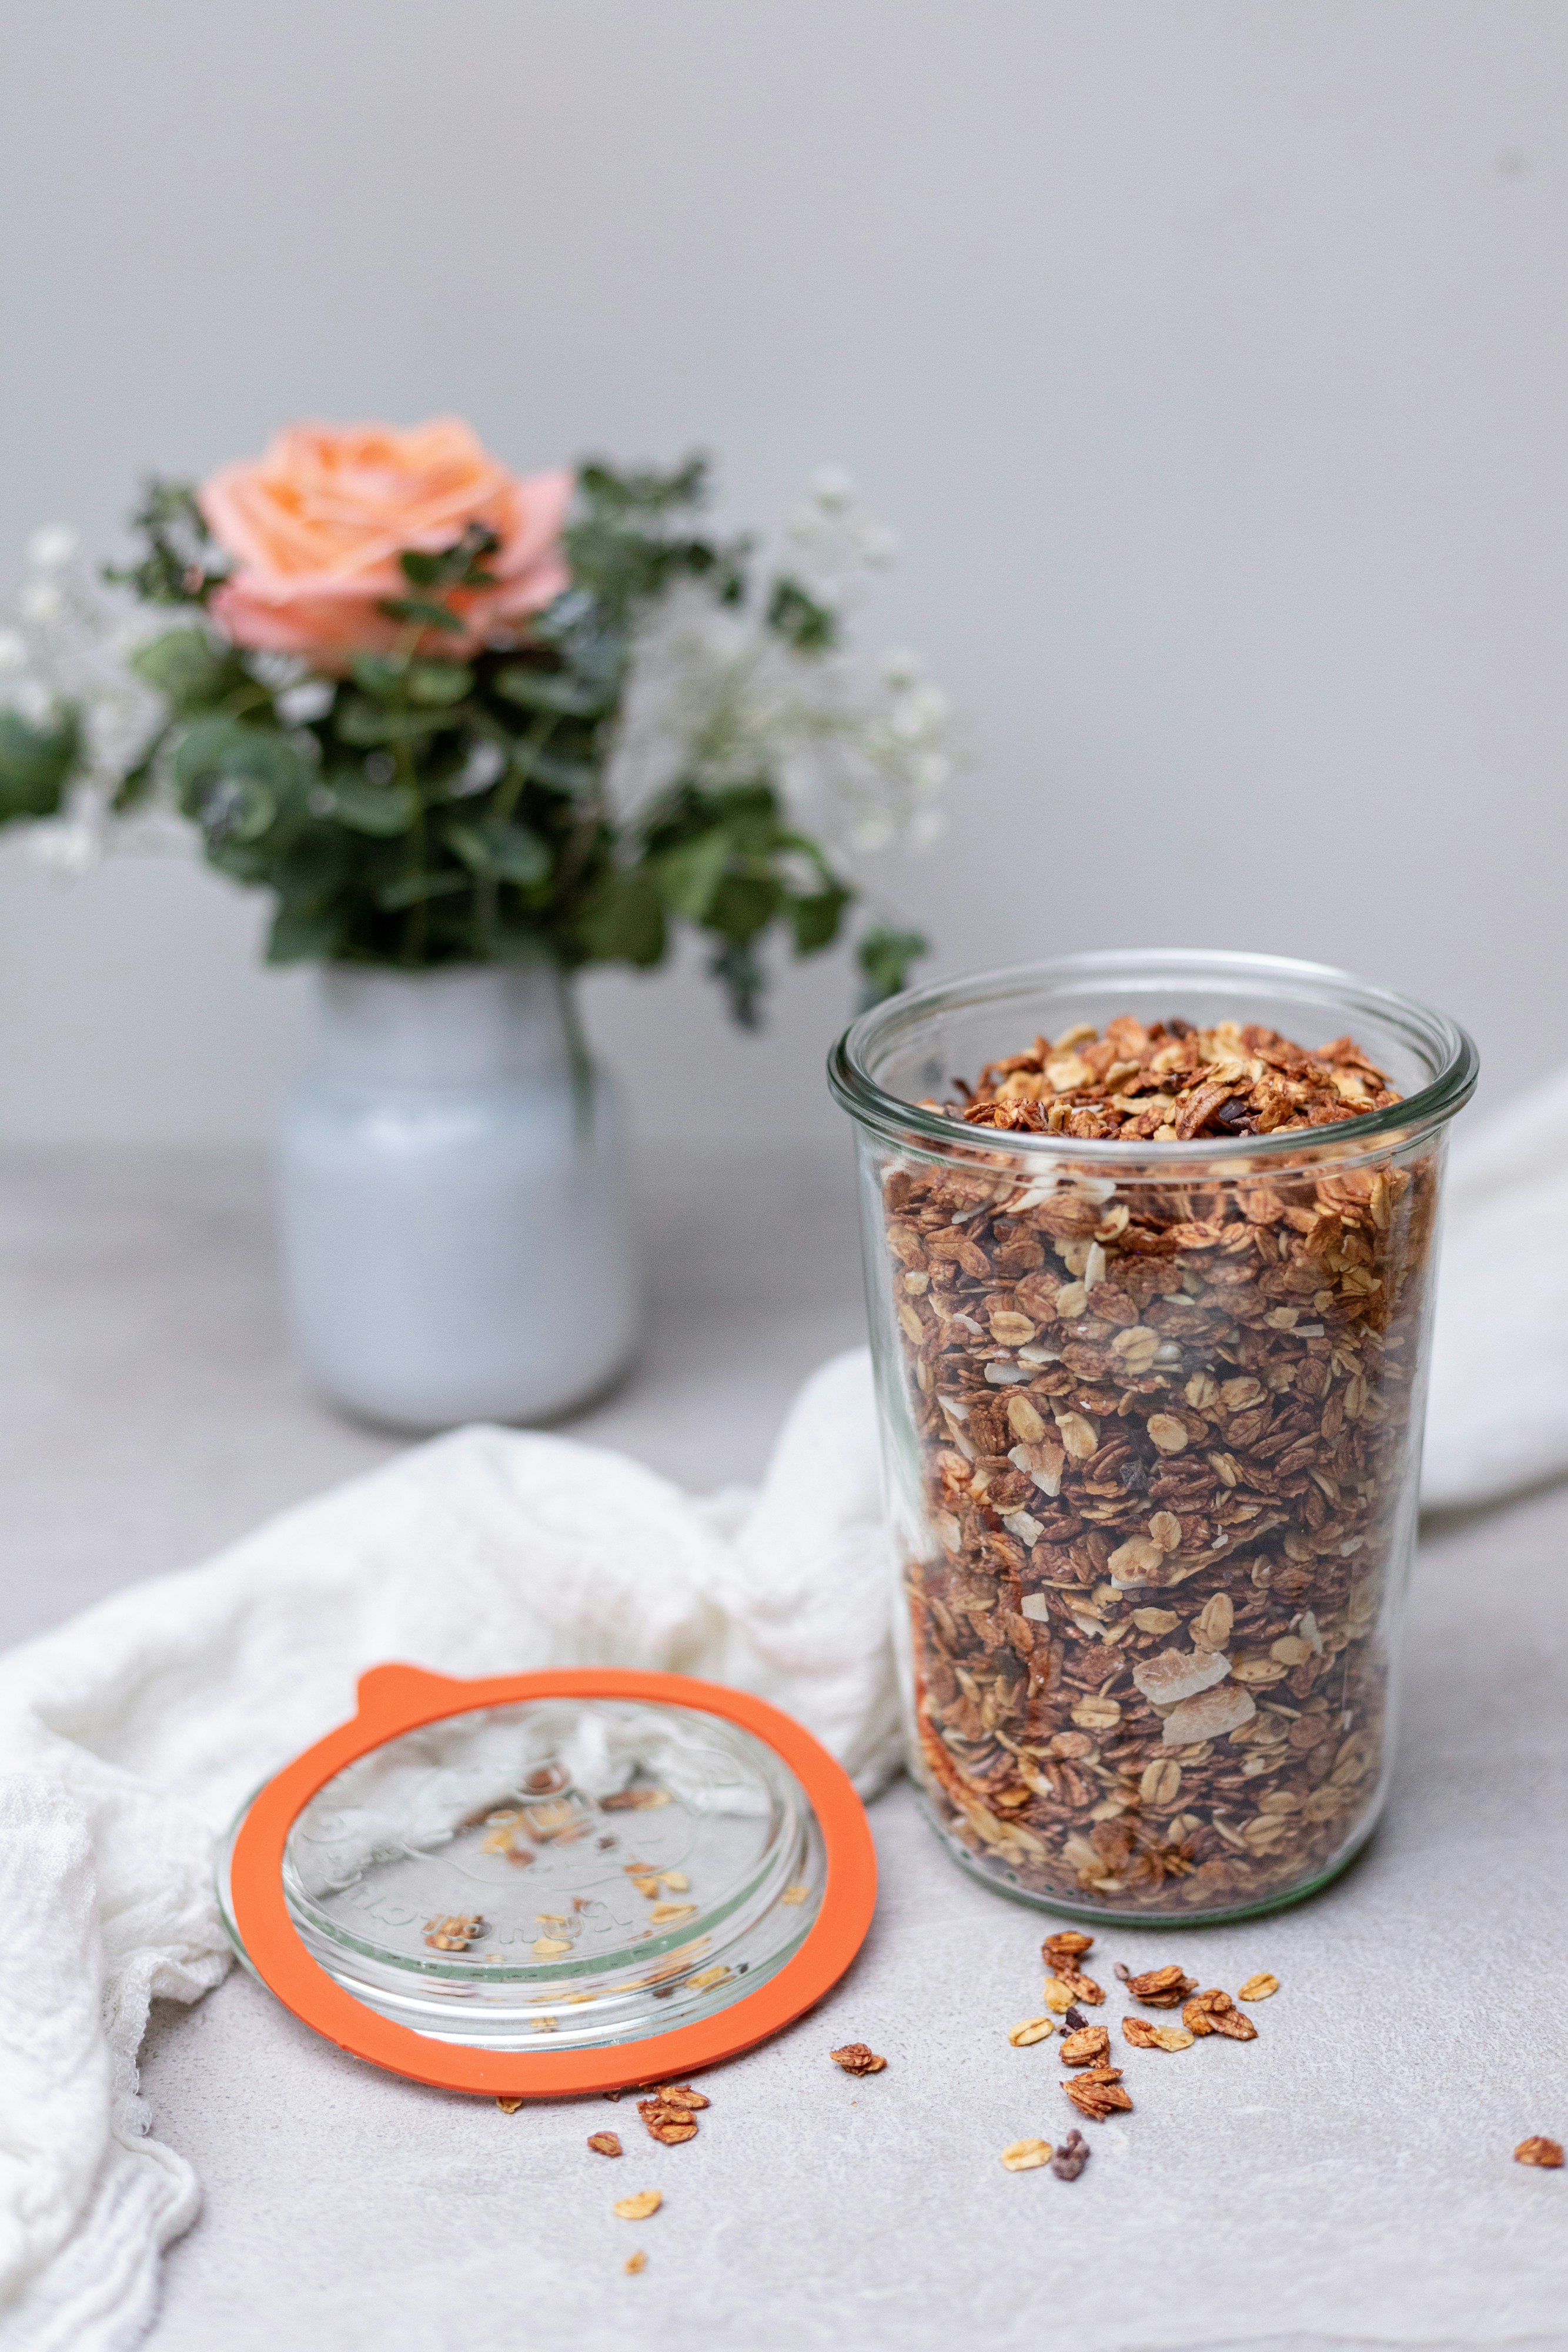 Overnight oats stored in airtight containers